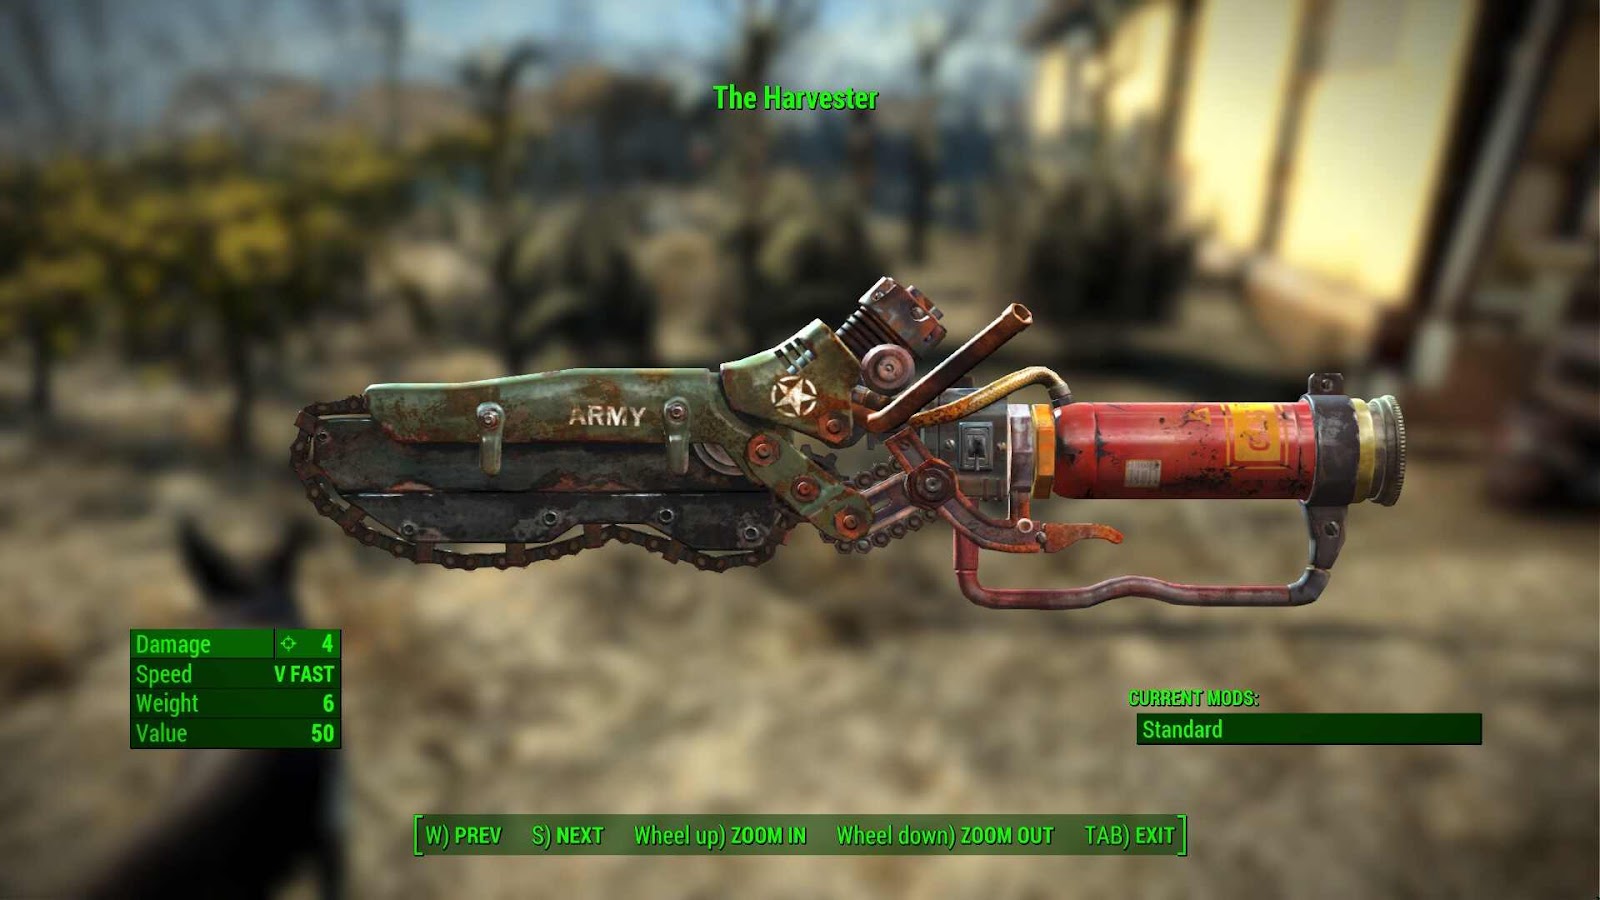 Best melee weapons in Fallout 4, ranked